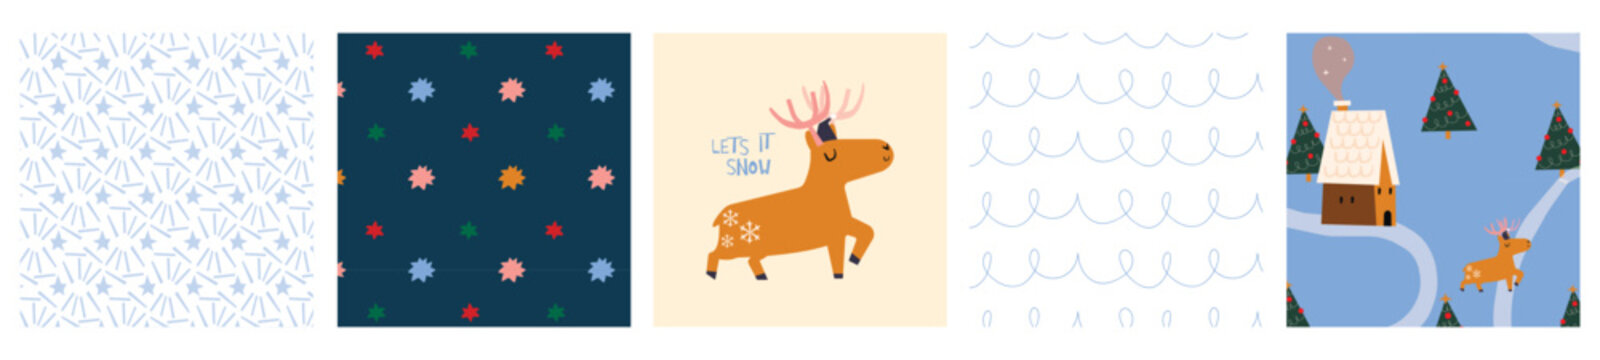 Christmas card and patterns set - hand drawn cute flyers. Postcards with cartoon reindeer  and christmas patterns. Vector illustration.